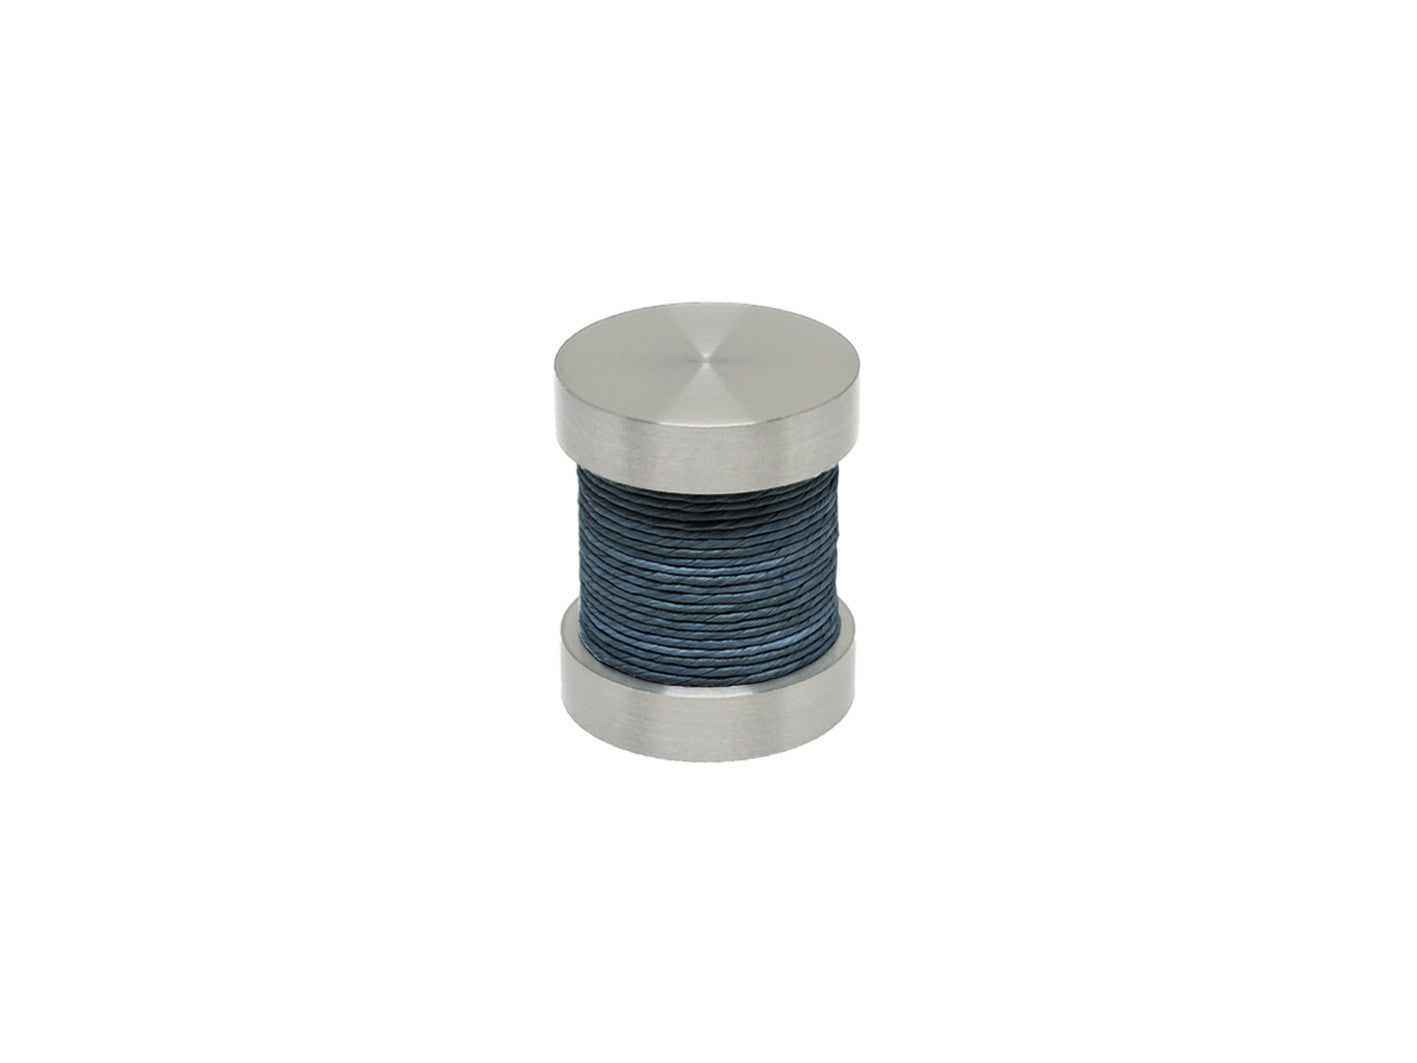 Orca dark blue coloured twine groove finial | Walcot House 30mm stainless steel collection